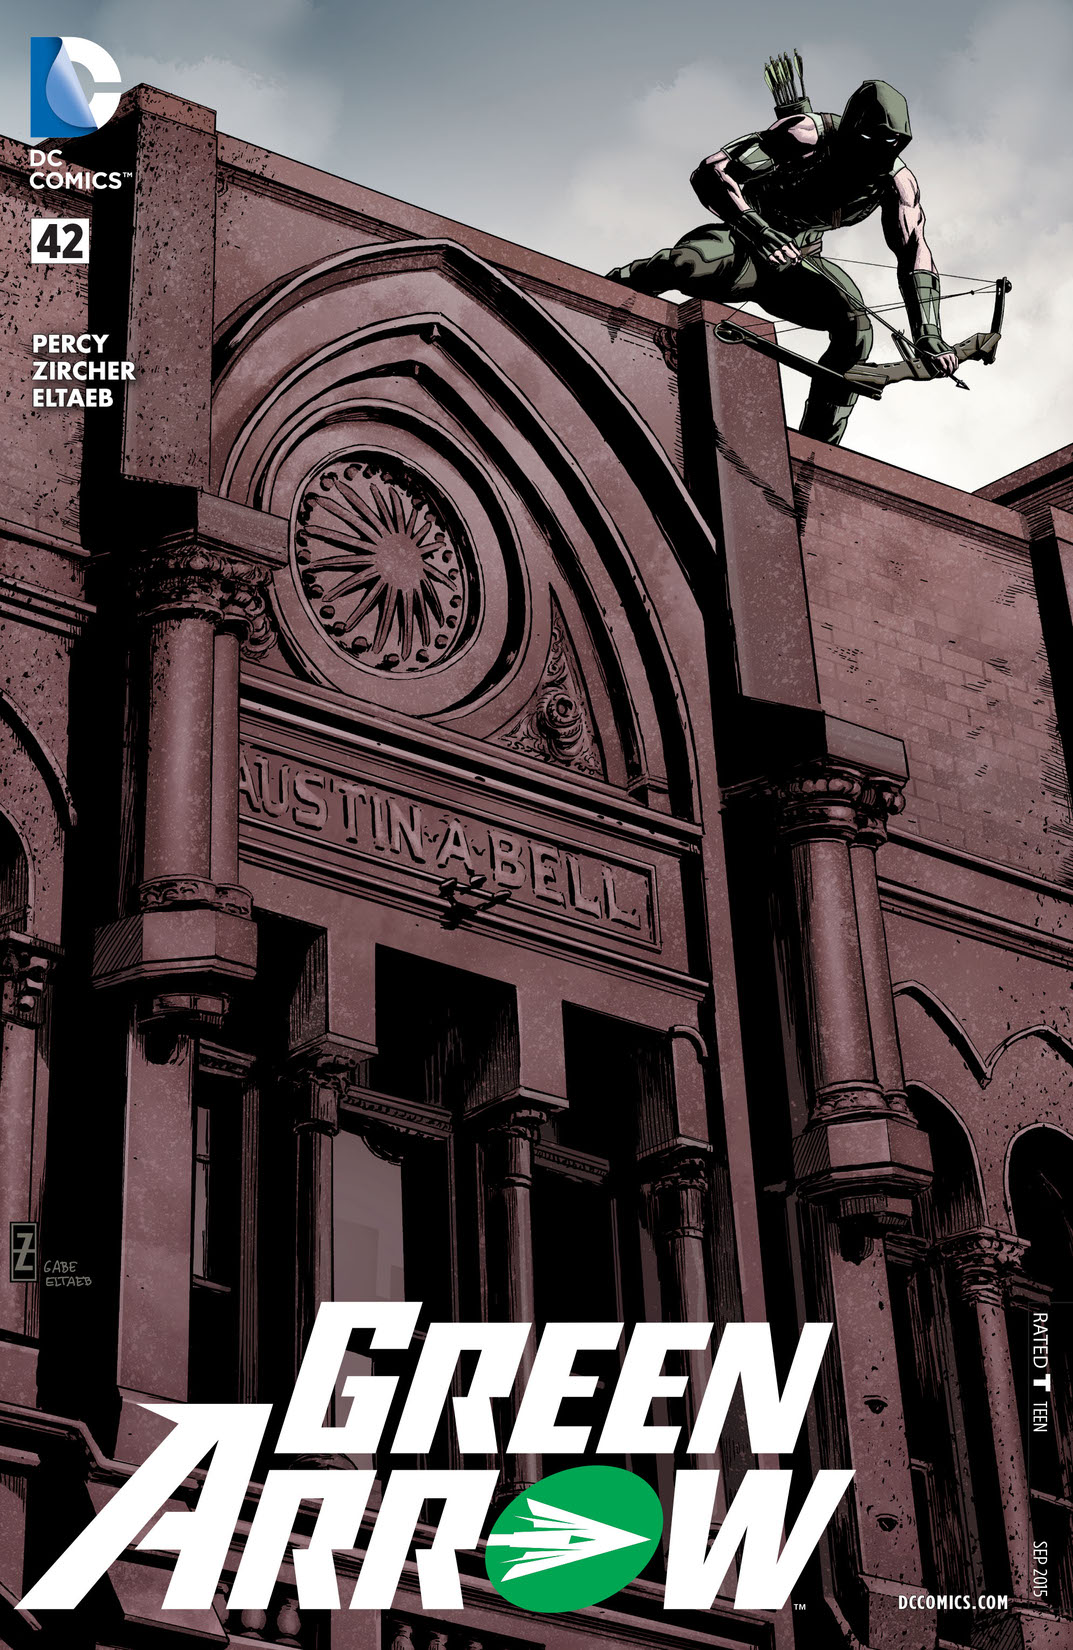 Green Arrow (2011-) #42 preview images